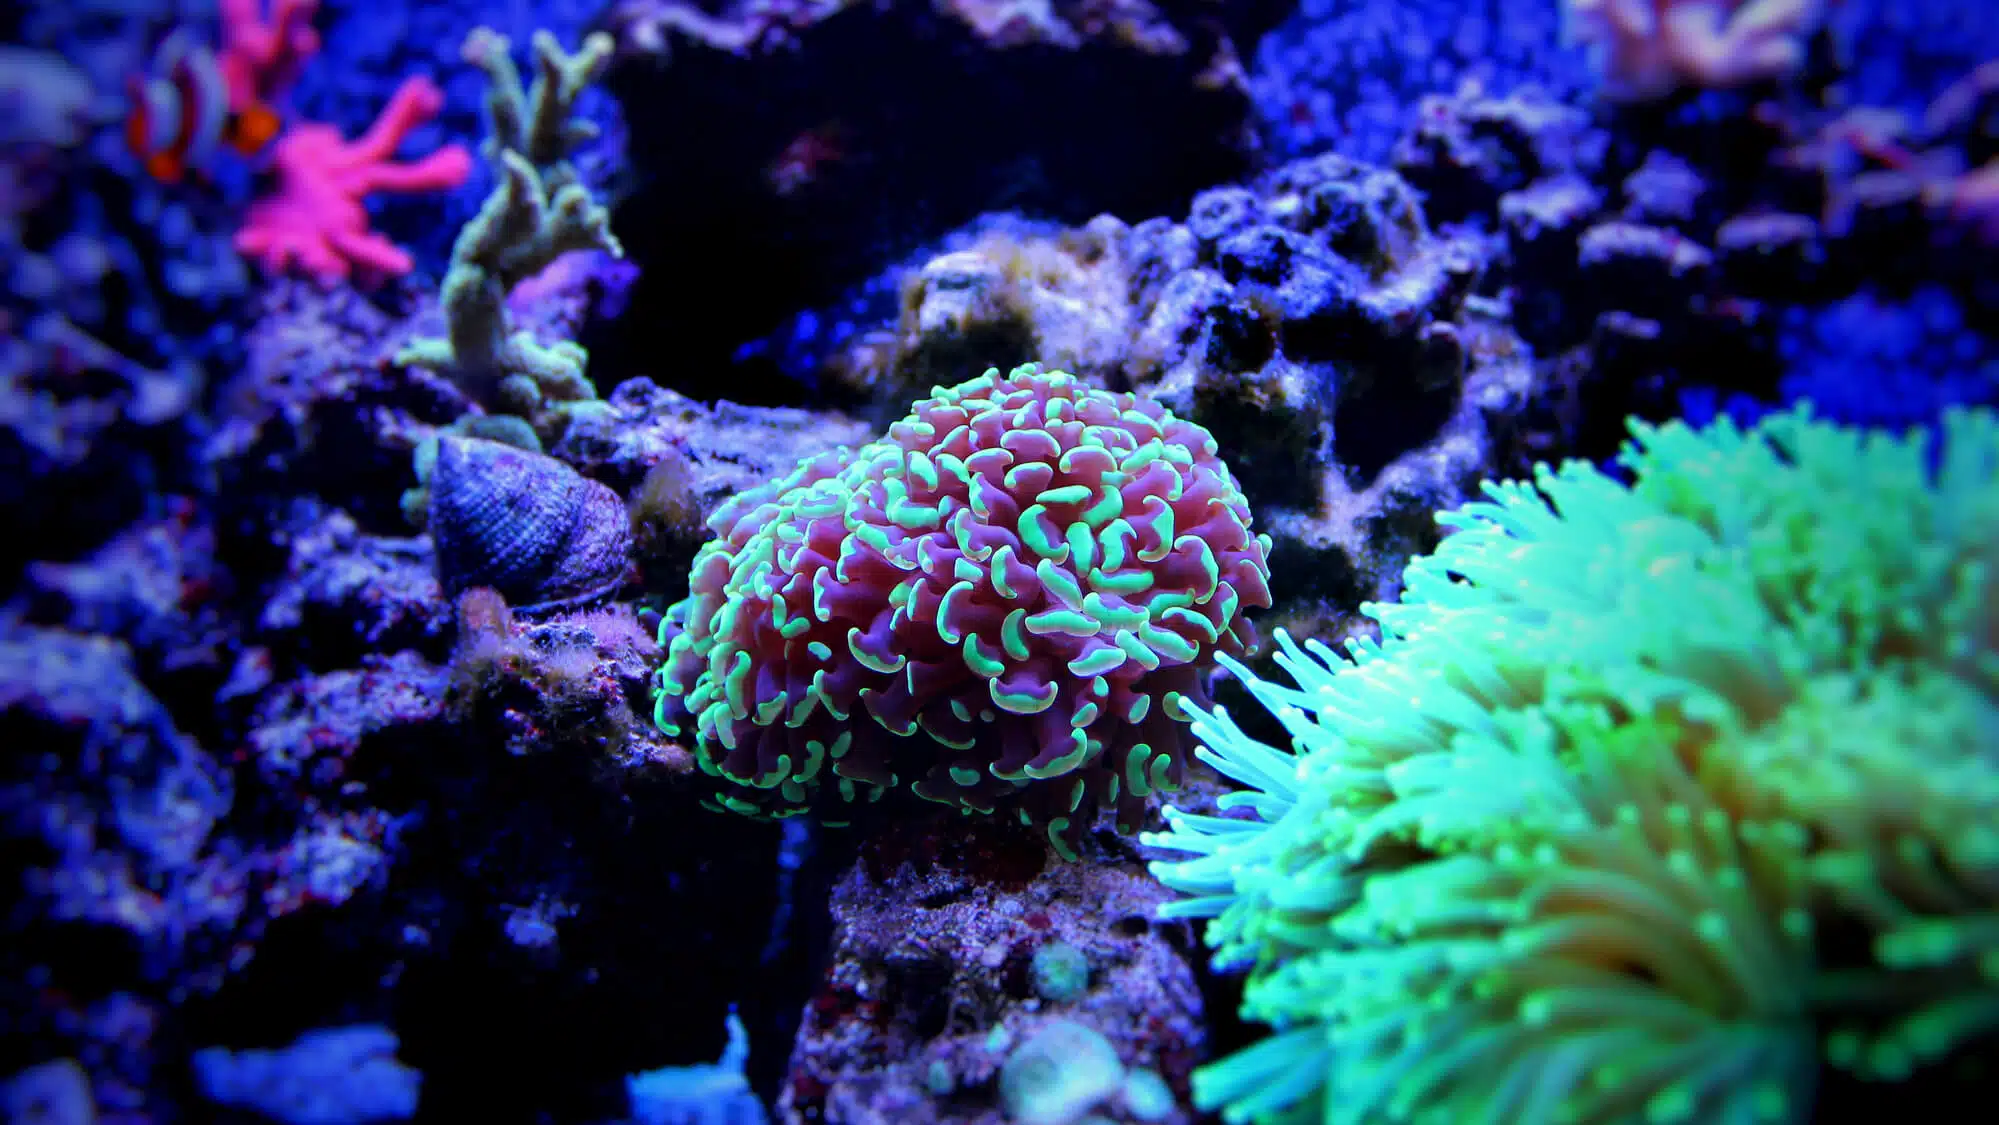 Glowing corals in the depths of the sea.